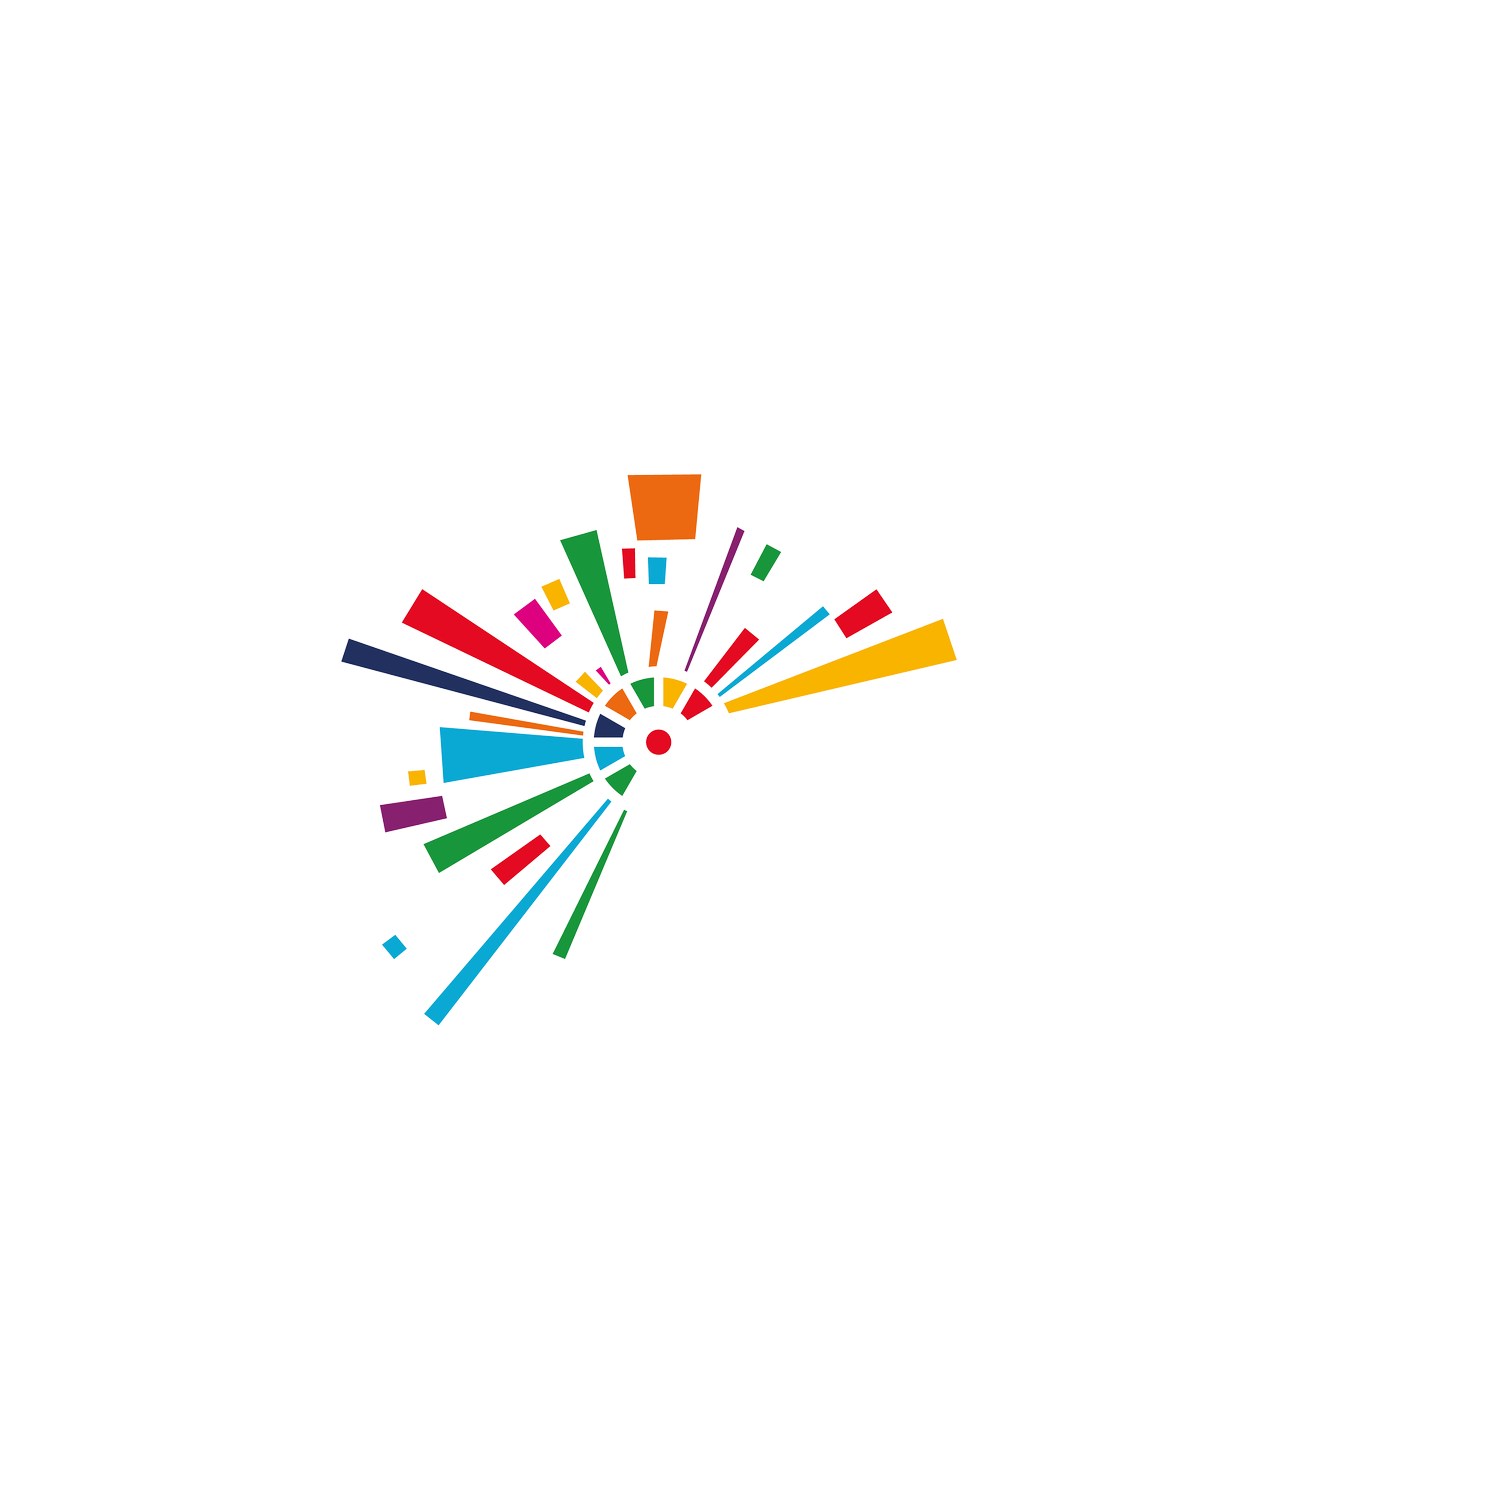 Inspire to Action